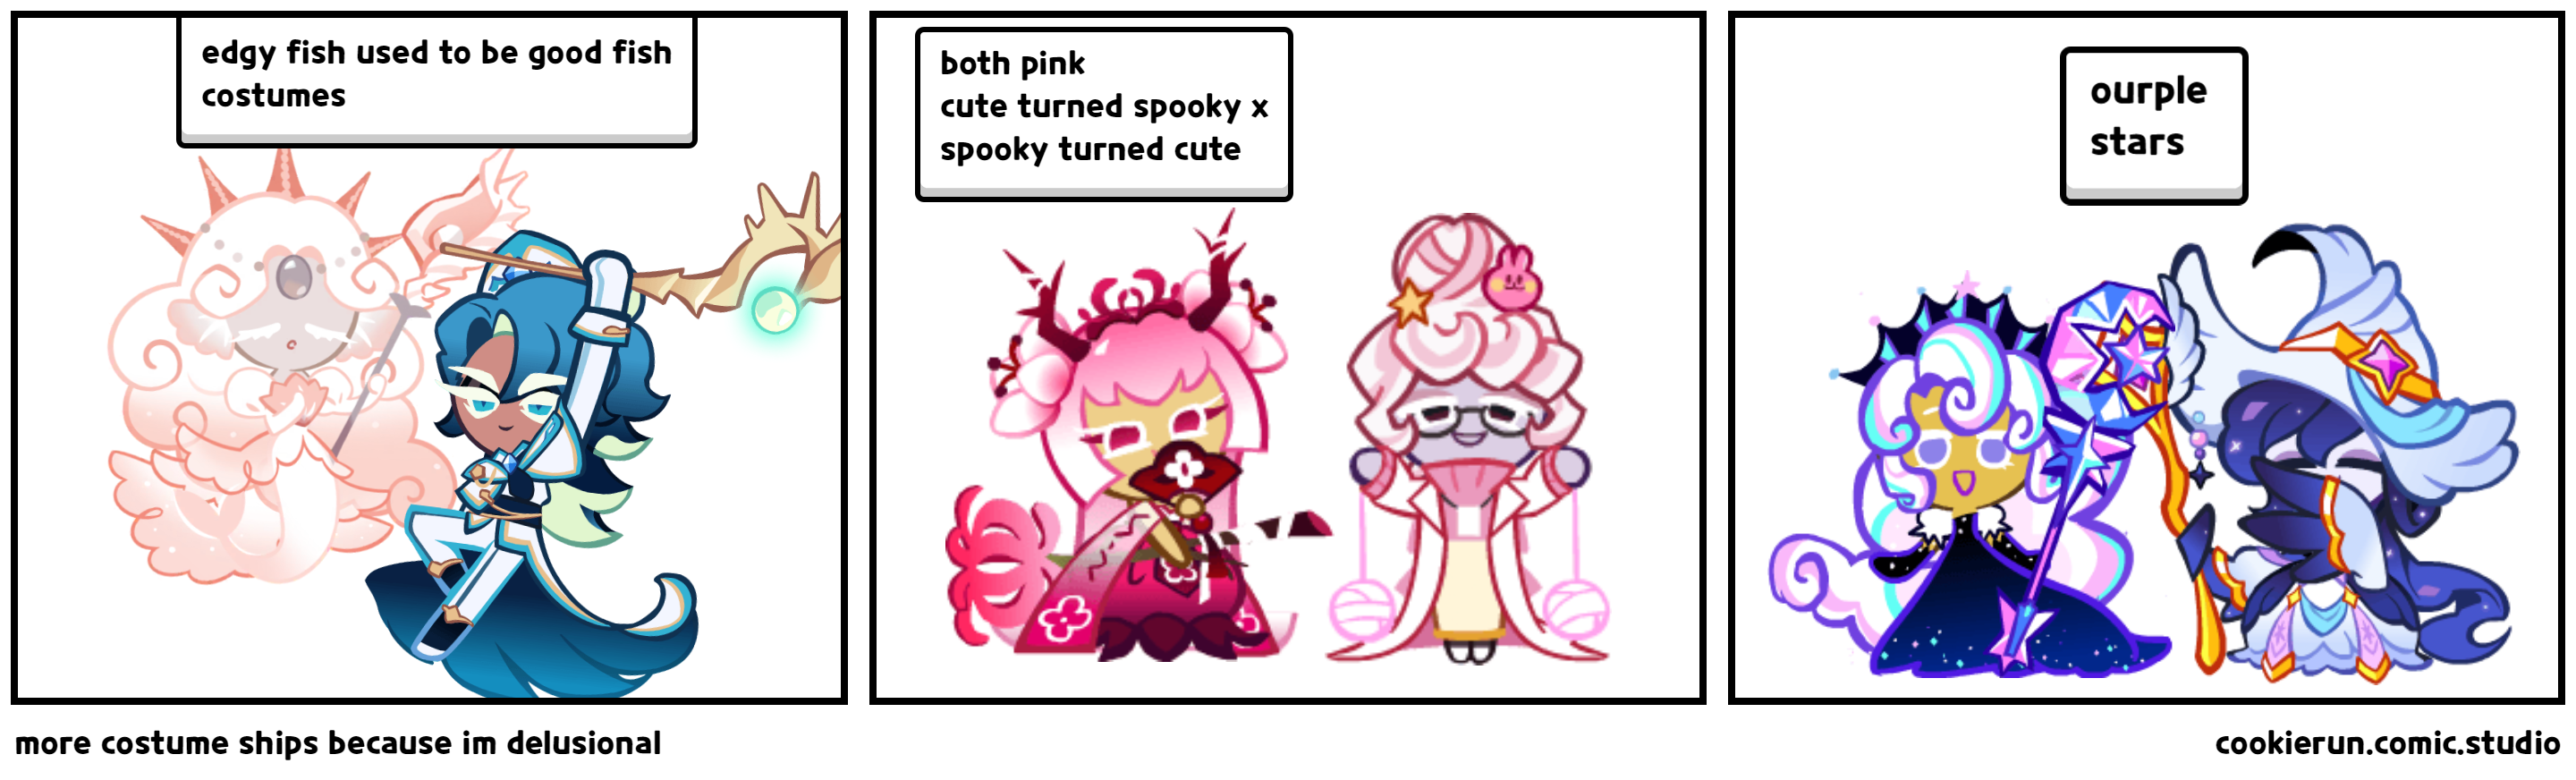 more costume ships because im delusional